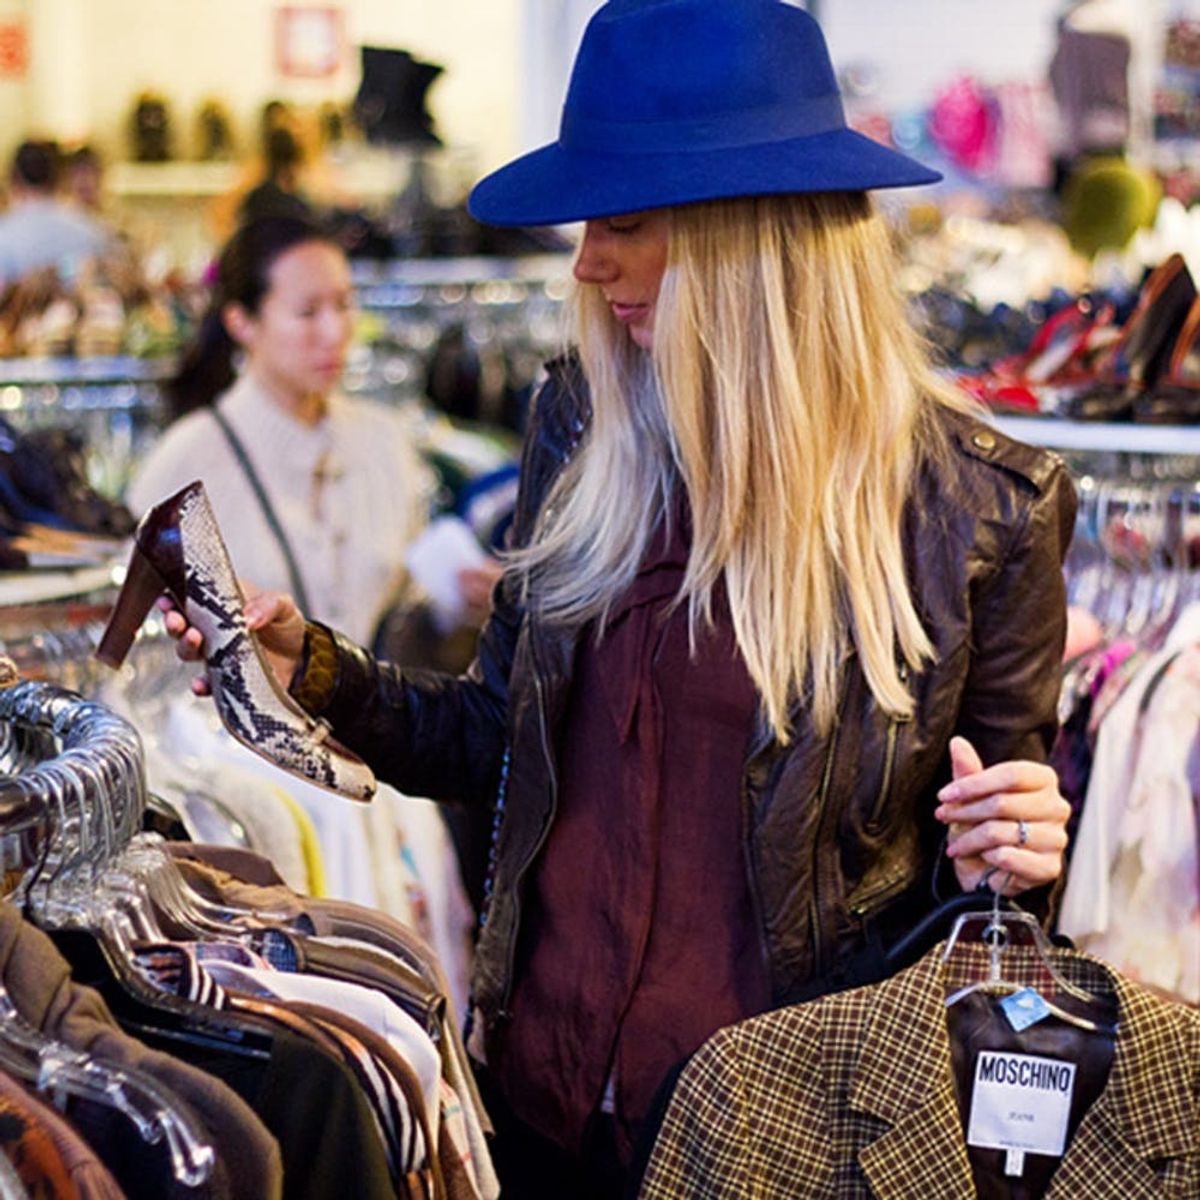 Vintage Shopping 101: Tips Every Vintage-Lovin’ Gal Should Know